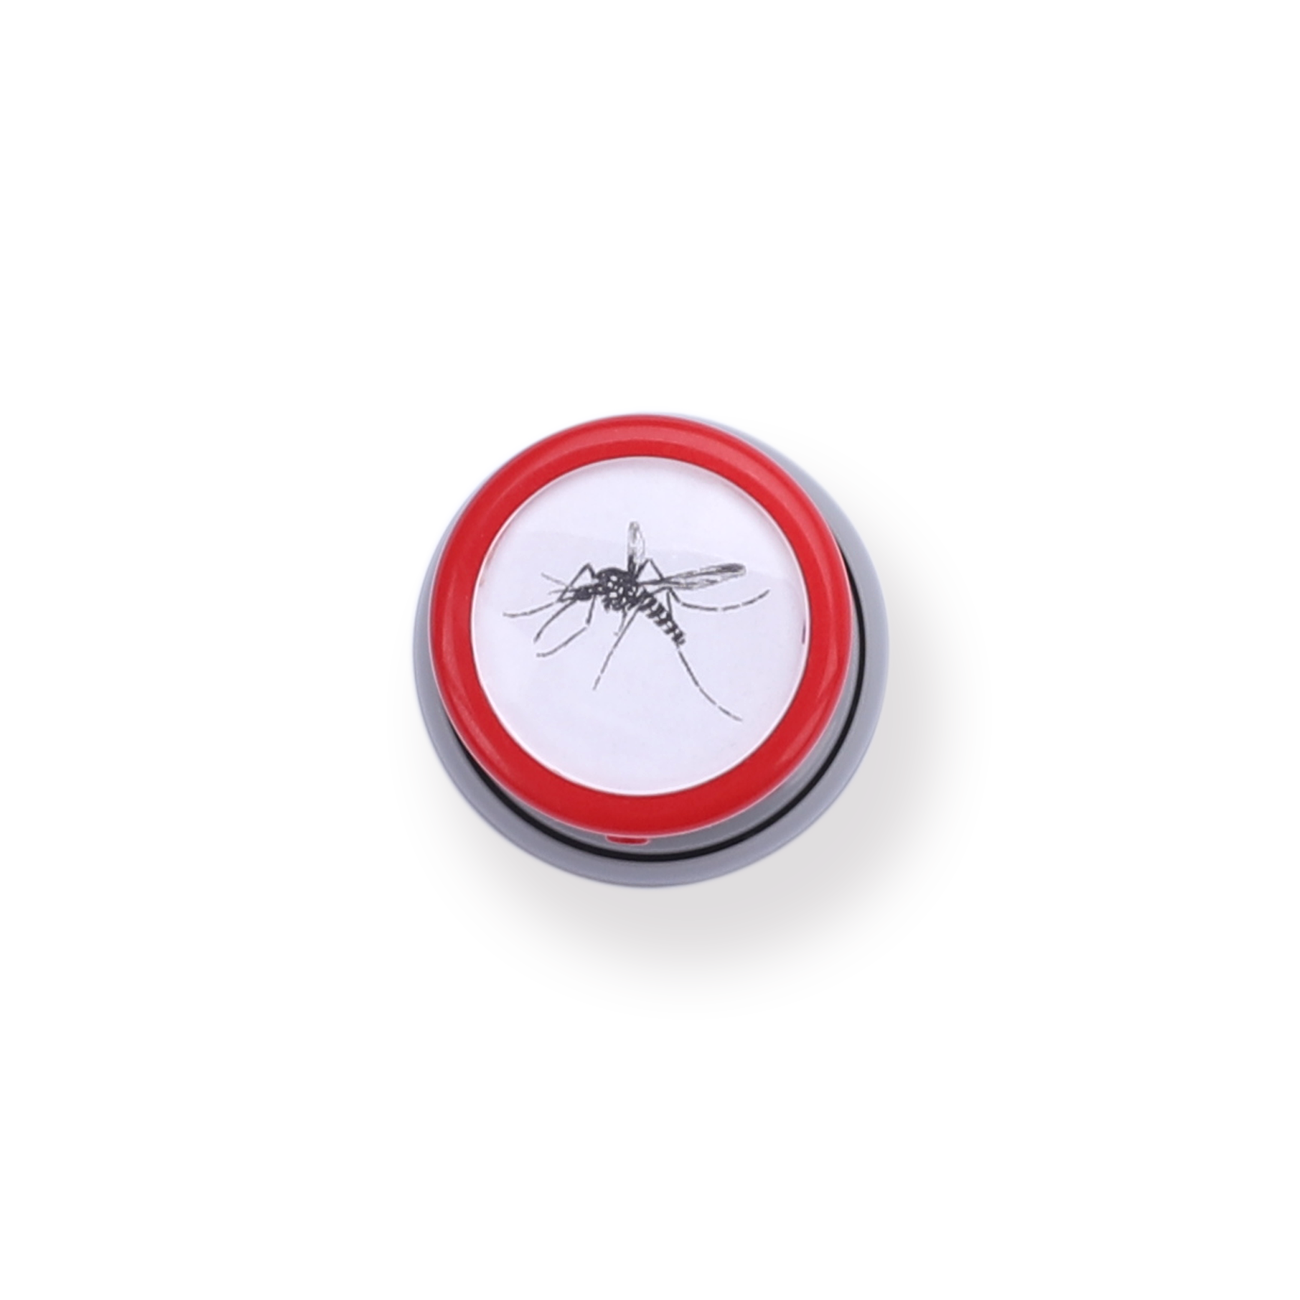 Alive Mosquito Pattern Stamp - Red - Stationery Pal